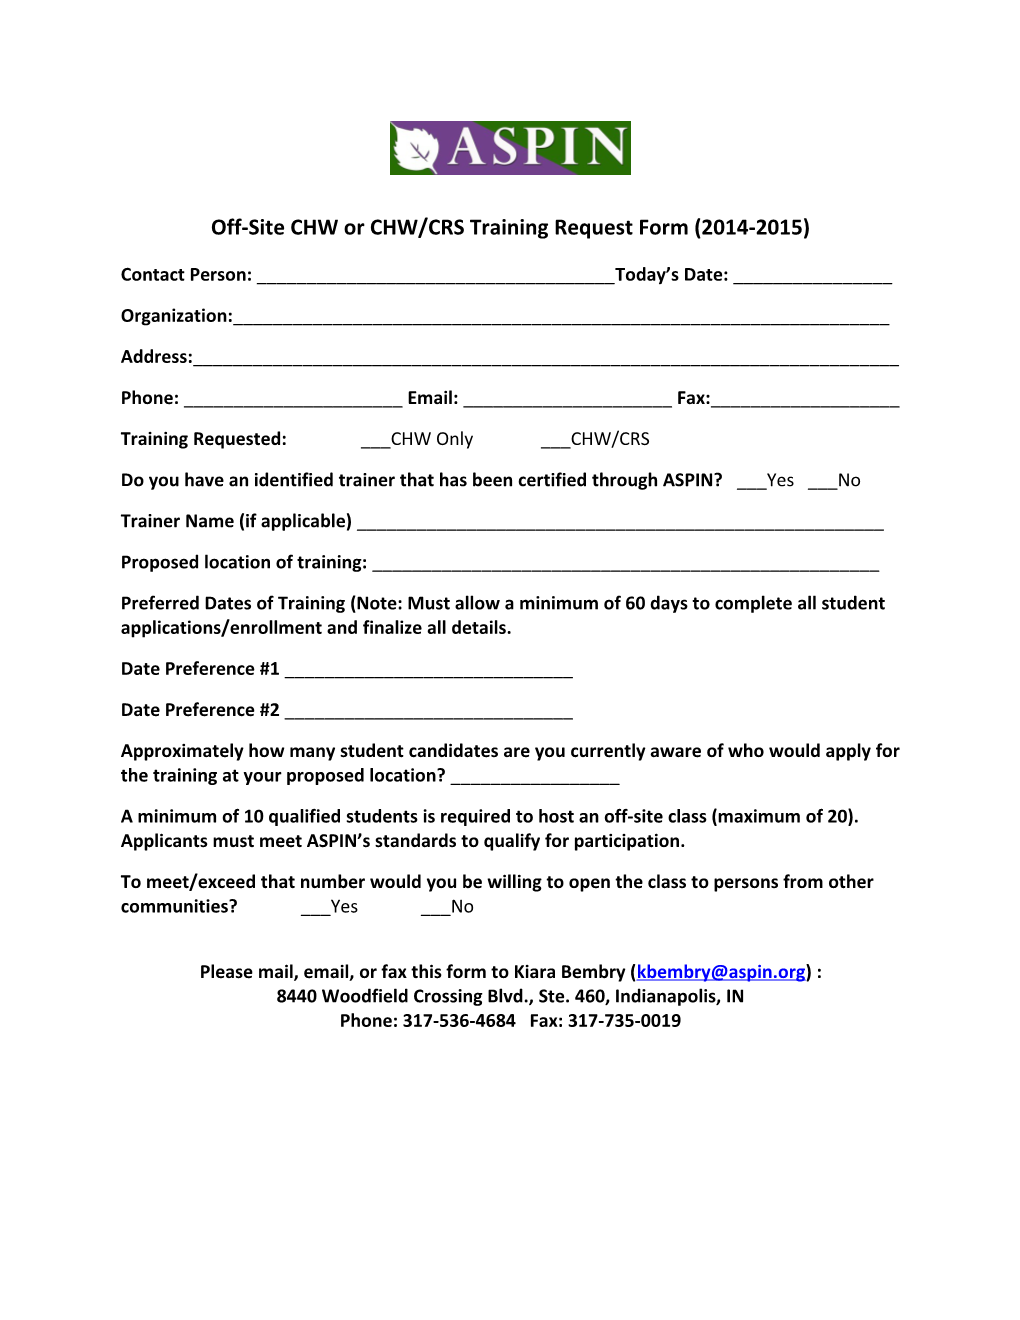 Off-Site CHW Or CHW/CRS Training Request Form (2014-2015)